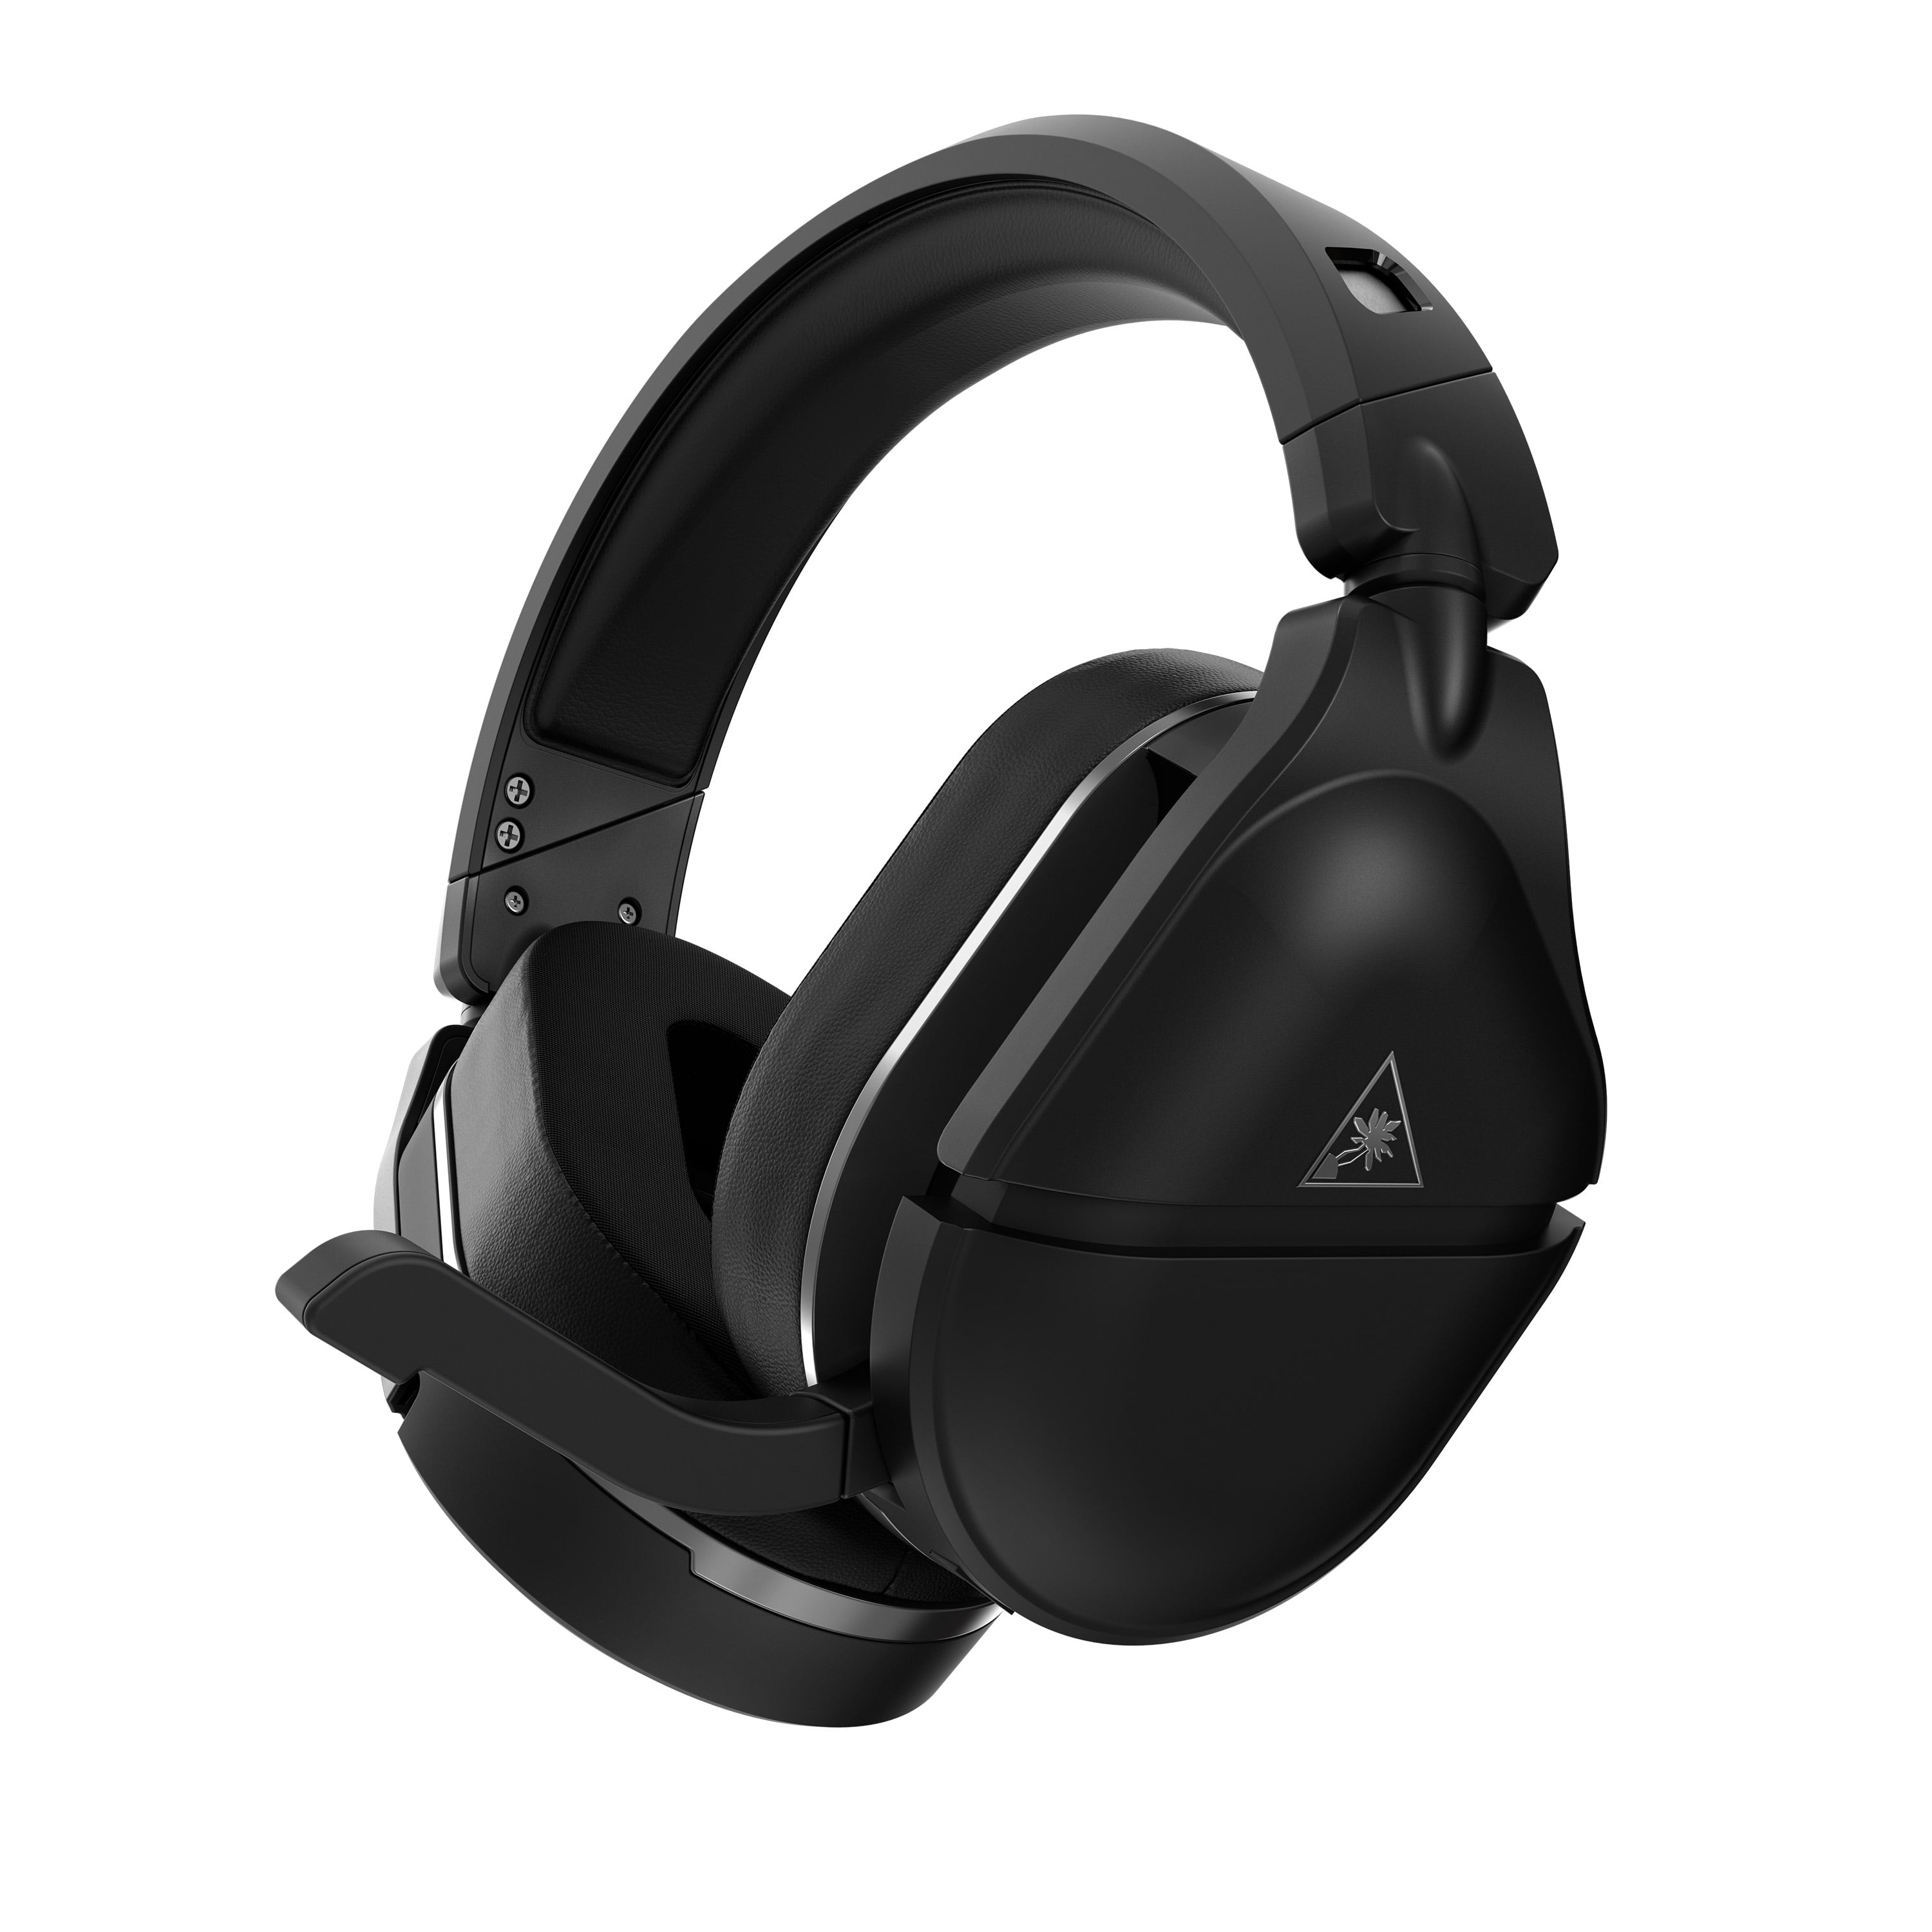 Turtle Beach Stealth 700 Gen 2 MAX Wireless Multiplatform Gaming Headset - Xbox X, Xbox S, Xbox One, PS5, PS4, Windows 10 & 11 PCs, NSW – Bluetooth, 40+ Hour Battery, 50mm Nanoclear Speakers, Black